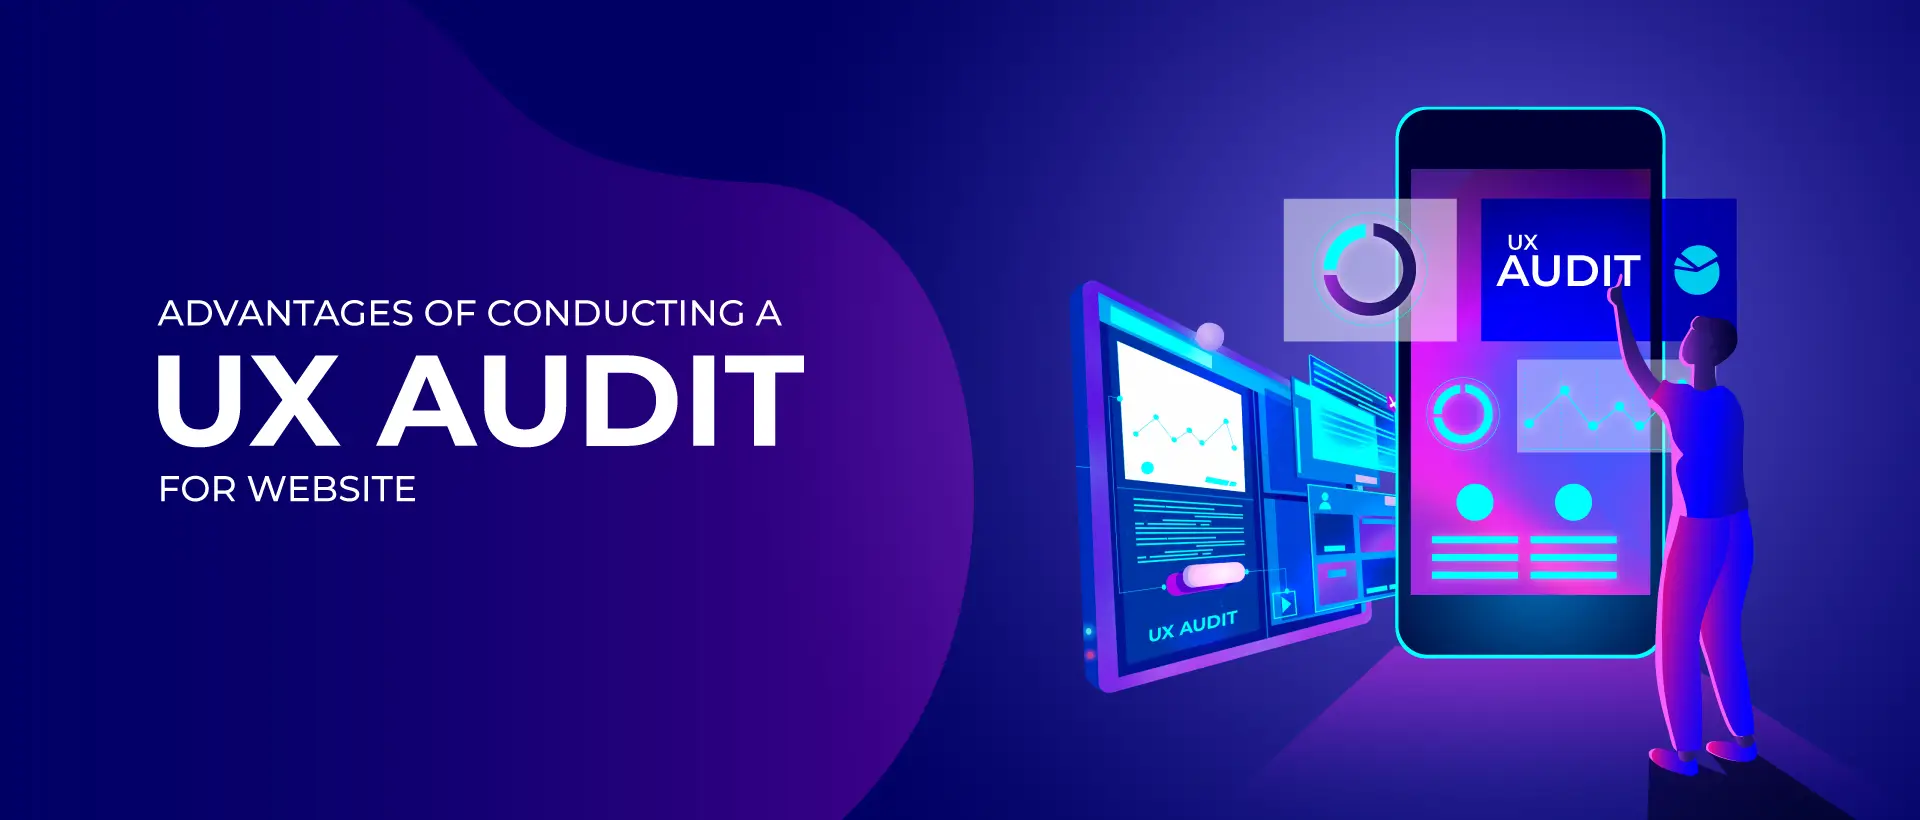 Advantages of Conducting a UX Audit for Website